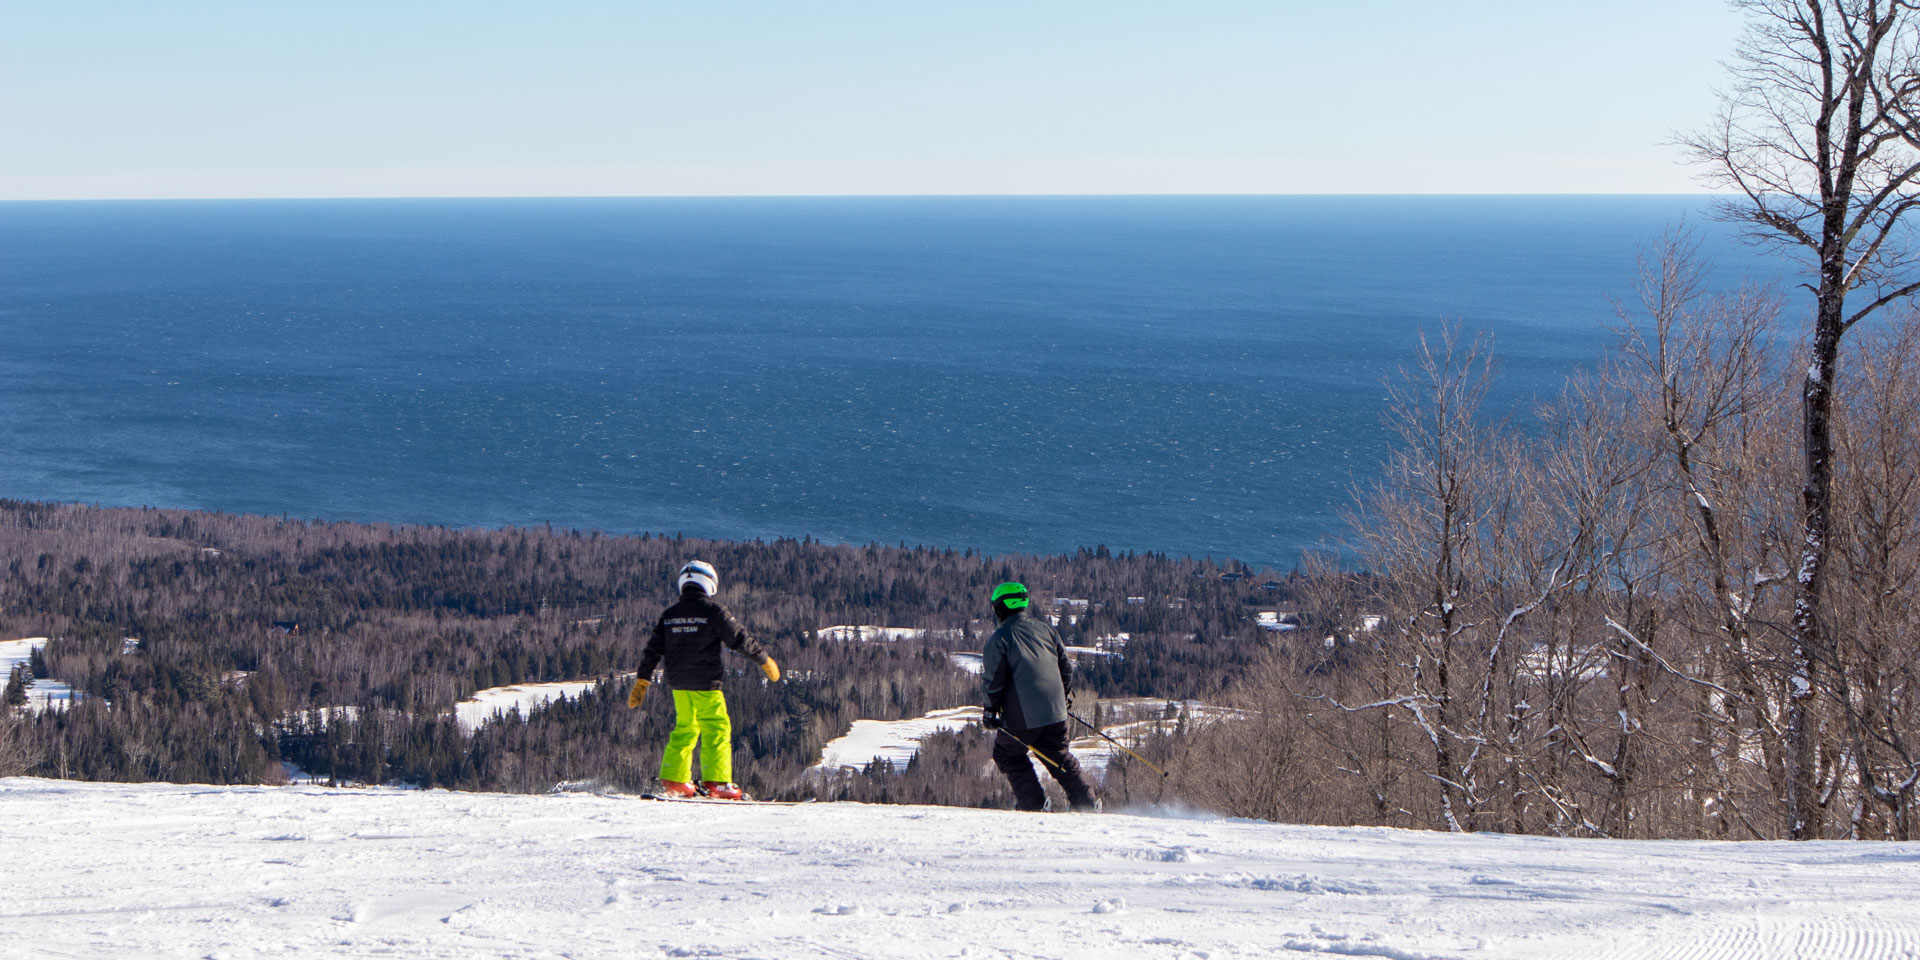 Snow and Skiing Await at Lutsen Mountains, the Midwest’s Largest Ski